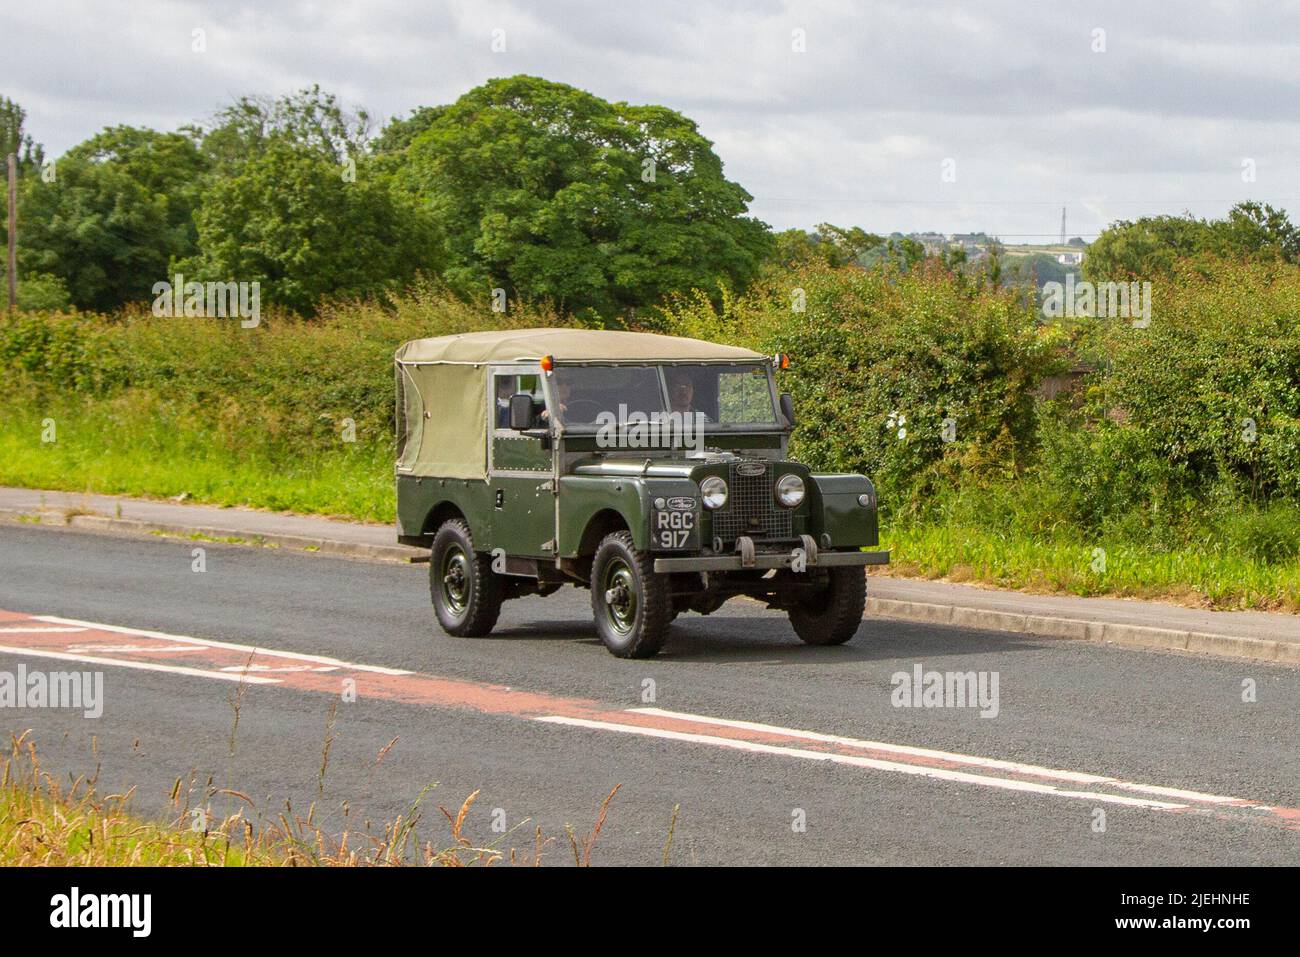 1956, 50s fifties green British Land Rover Series II 1997cc; en-route to Hoghton Tower for the Supercar Summer Showtime car meet which is organised by Great British Motor Shows in Preston, UK Stock Photo